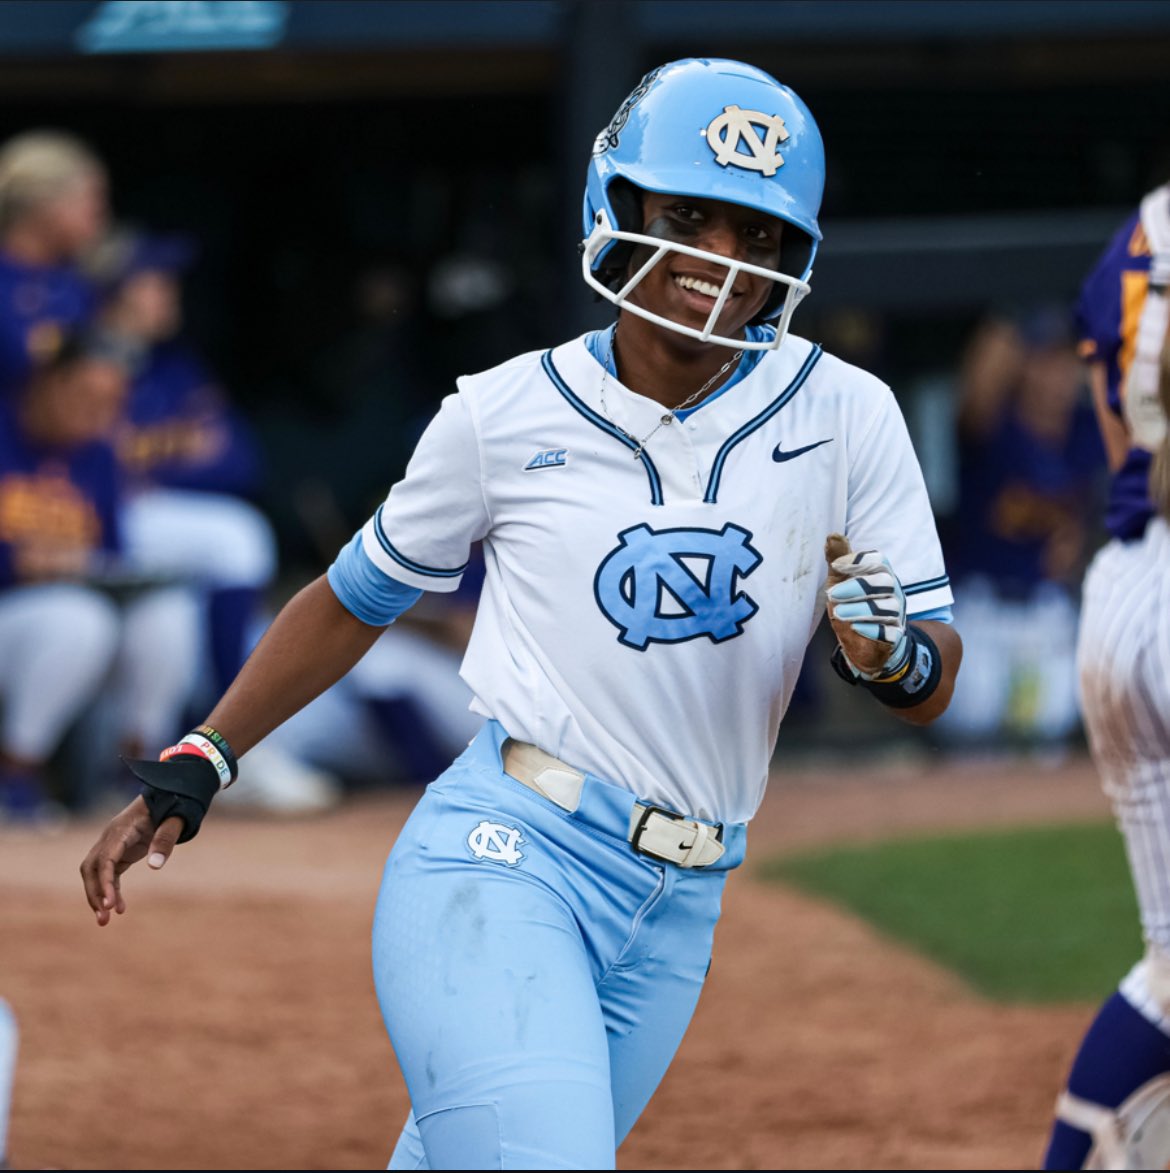 Sanaa appreciation post ✨ Our freshman outfielder finished the regular season batting .406 with 52 hits, 34 runs, 7 doubles, 2 triples, 5 home runs, 34 RBI and 20 walks 🔥 She has the most hits by a Tar Heel freshman since 2015! #GoHeels